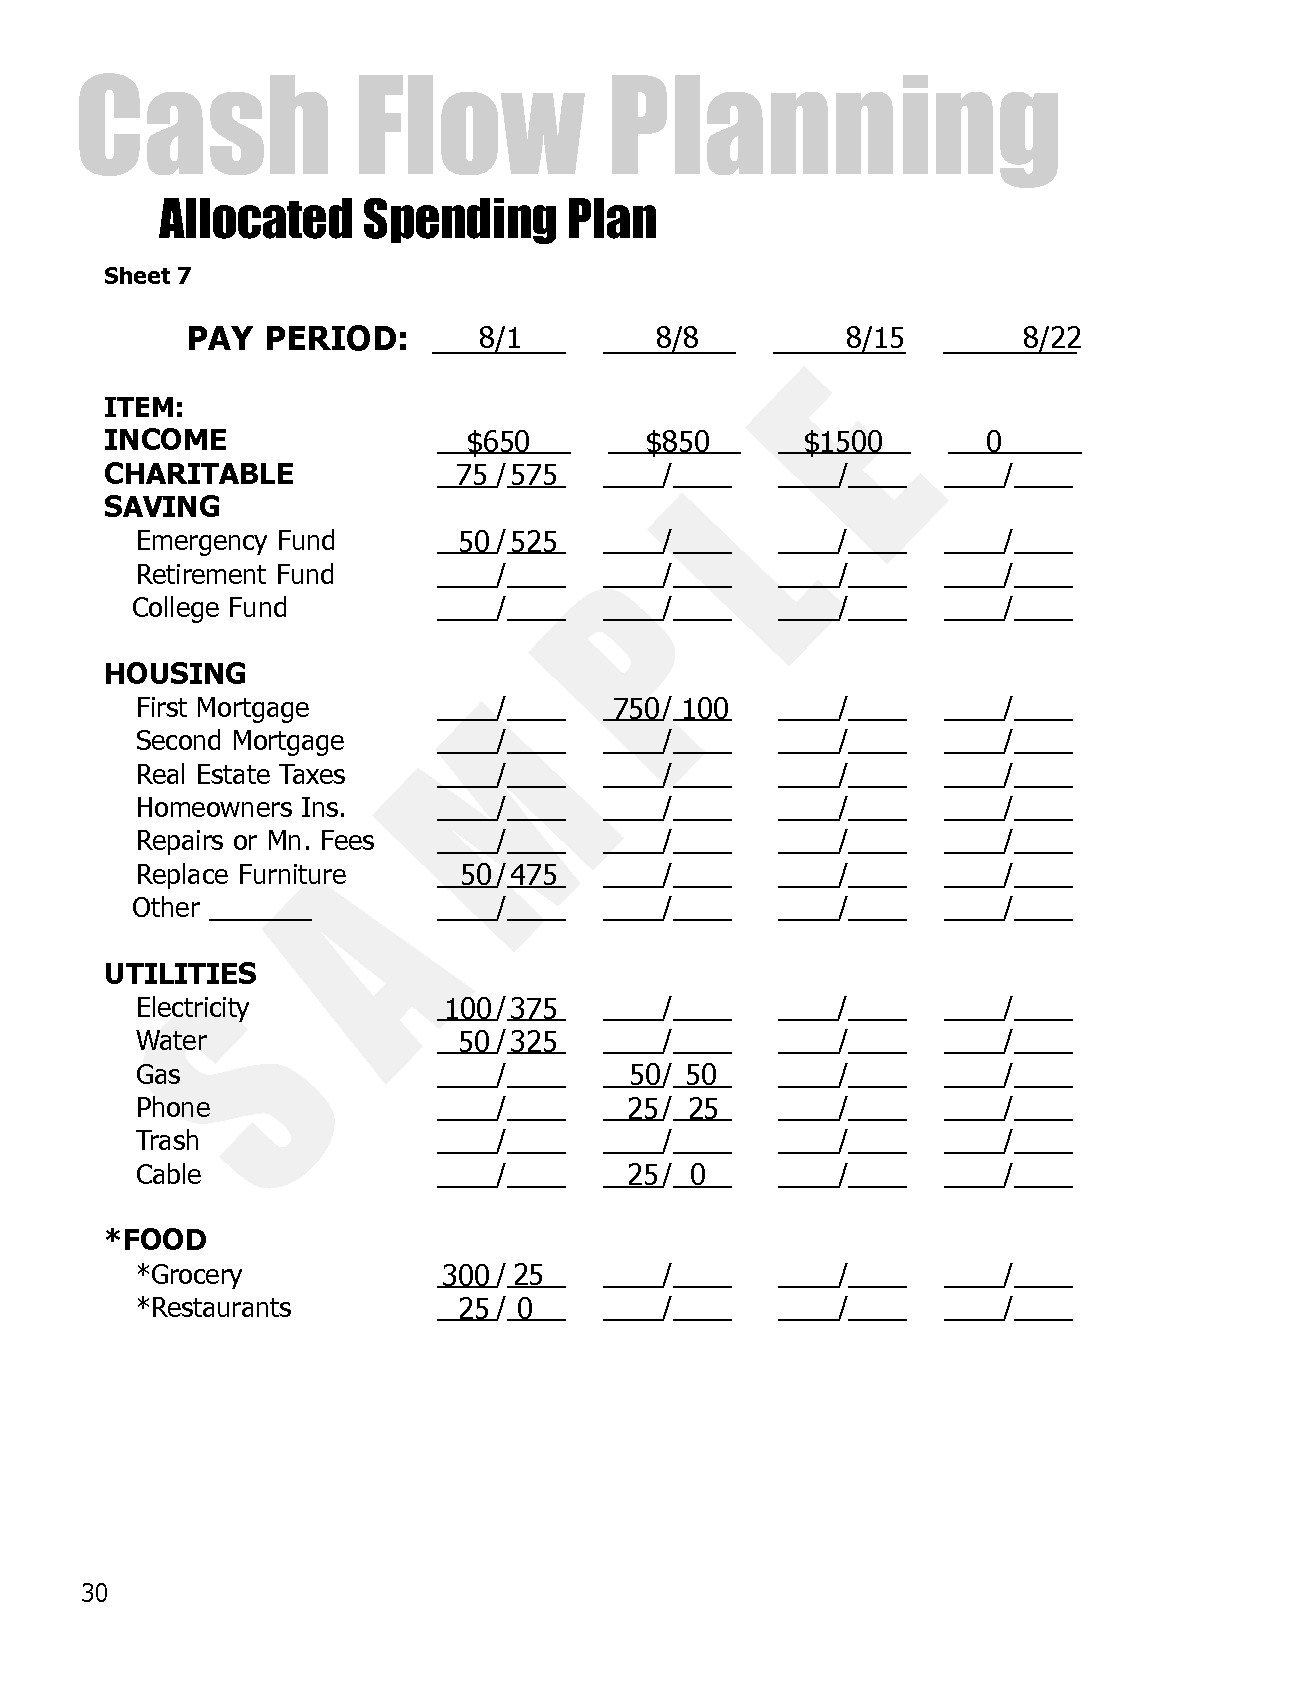 How To Use Dave Ramsey S Allocated Spending Plan Finance Document Budget Forms